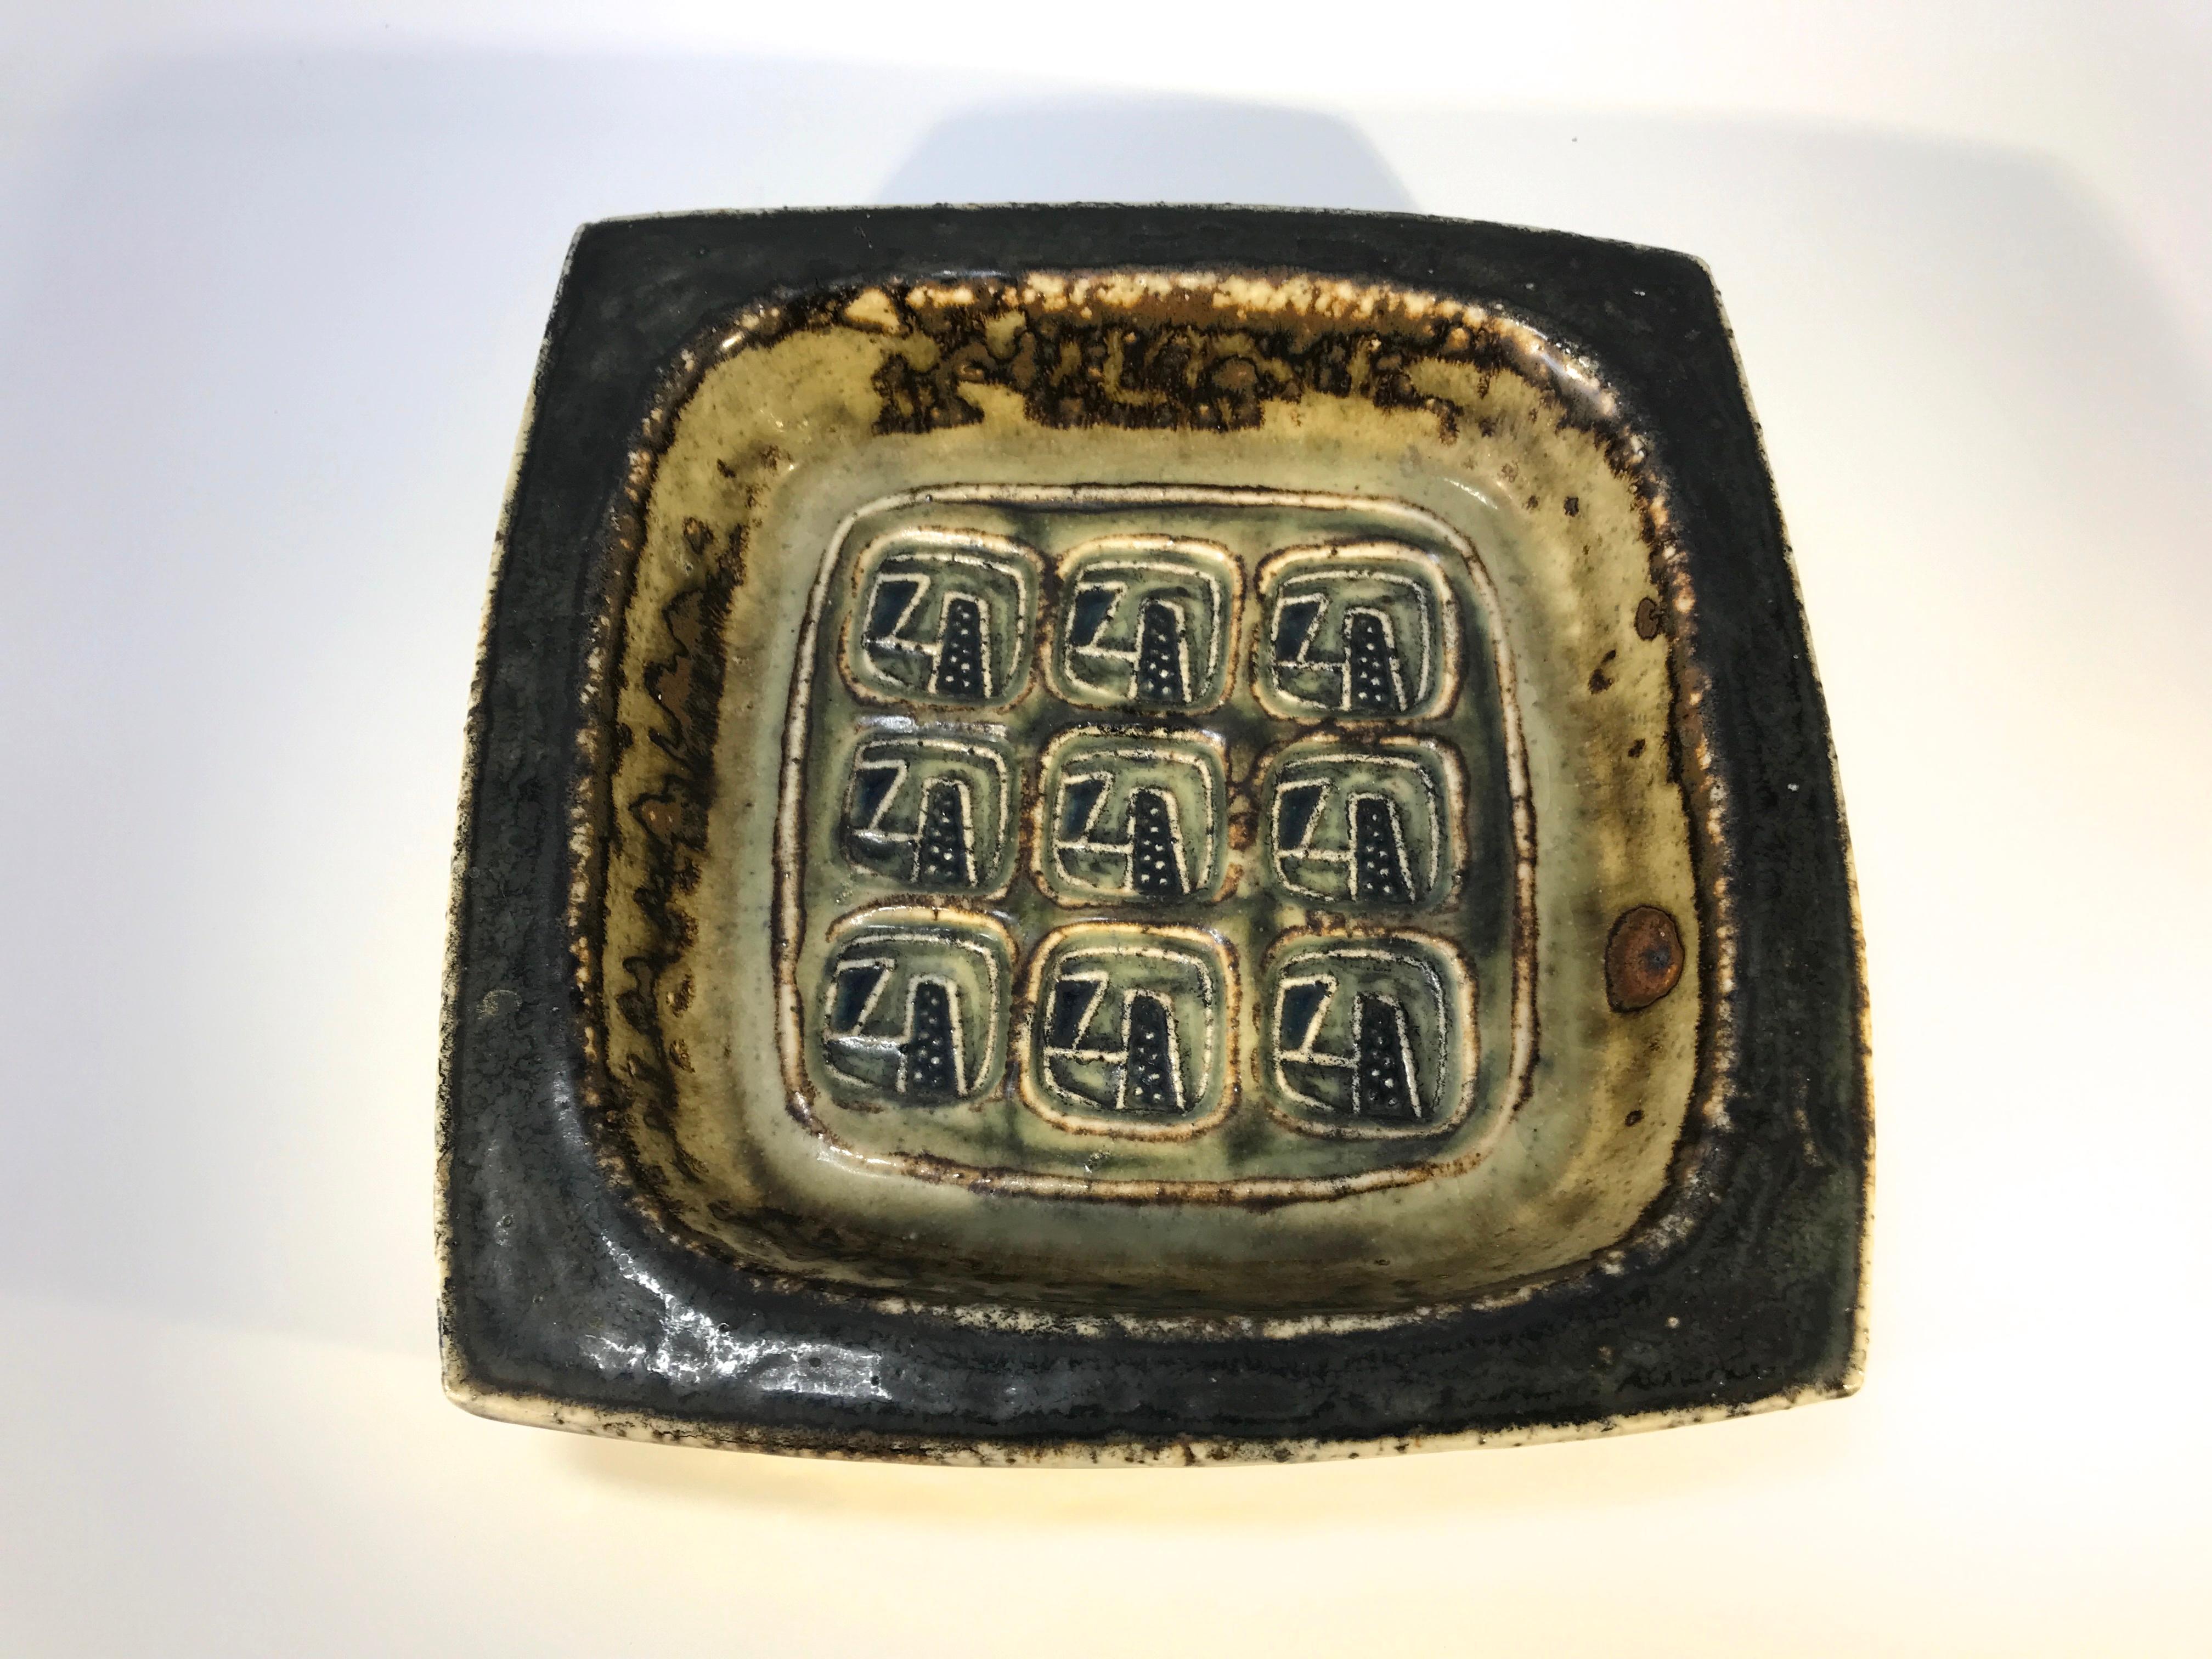 Square Abstract dish by Jorgen Mogensen for Royal Copenhagen, circa 1969
Dark brown glaze with hints of dark blue in the design
Signed and numbered 21972
In excellent condition and a worthy collectors piece.
  